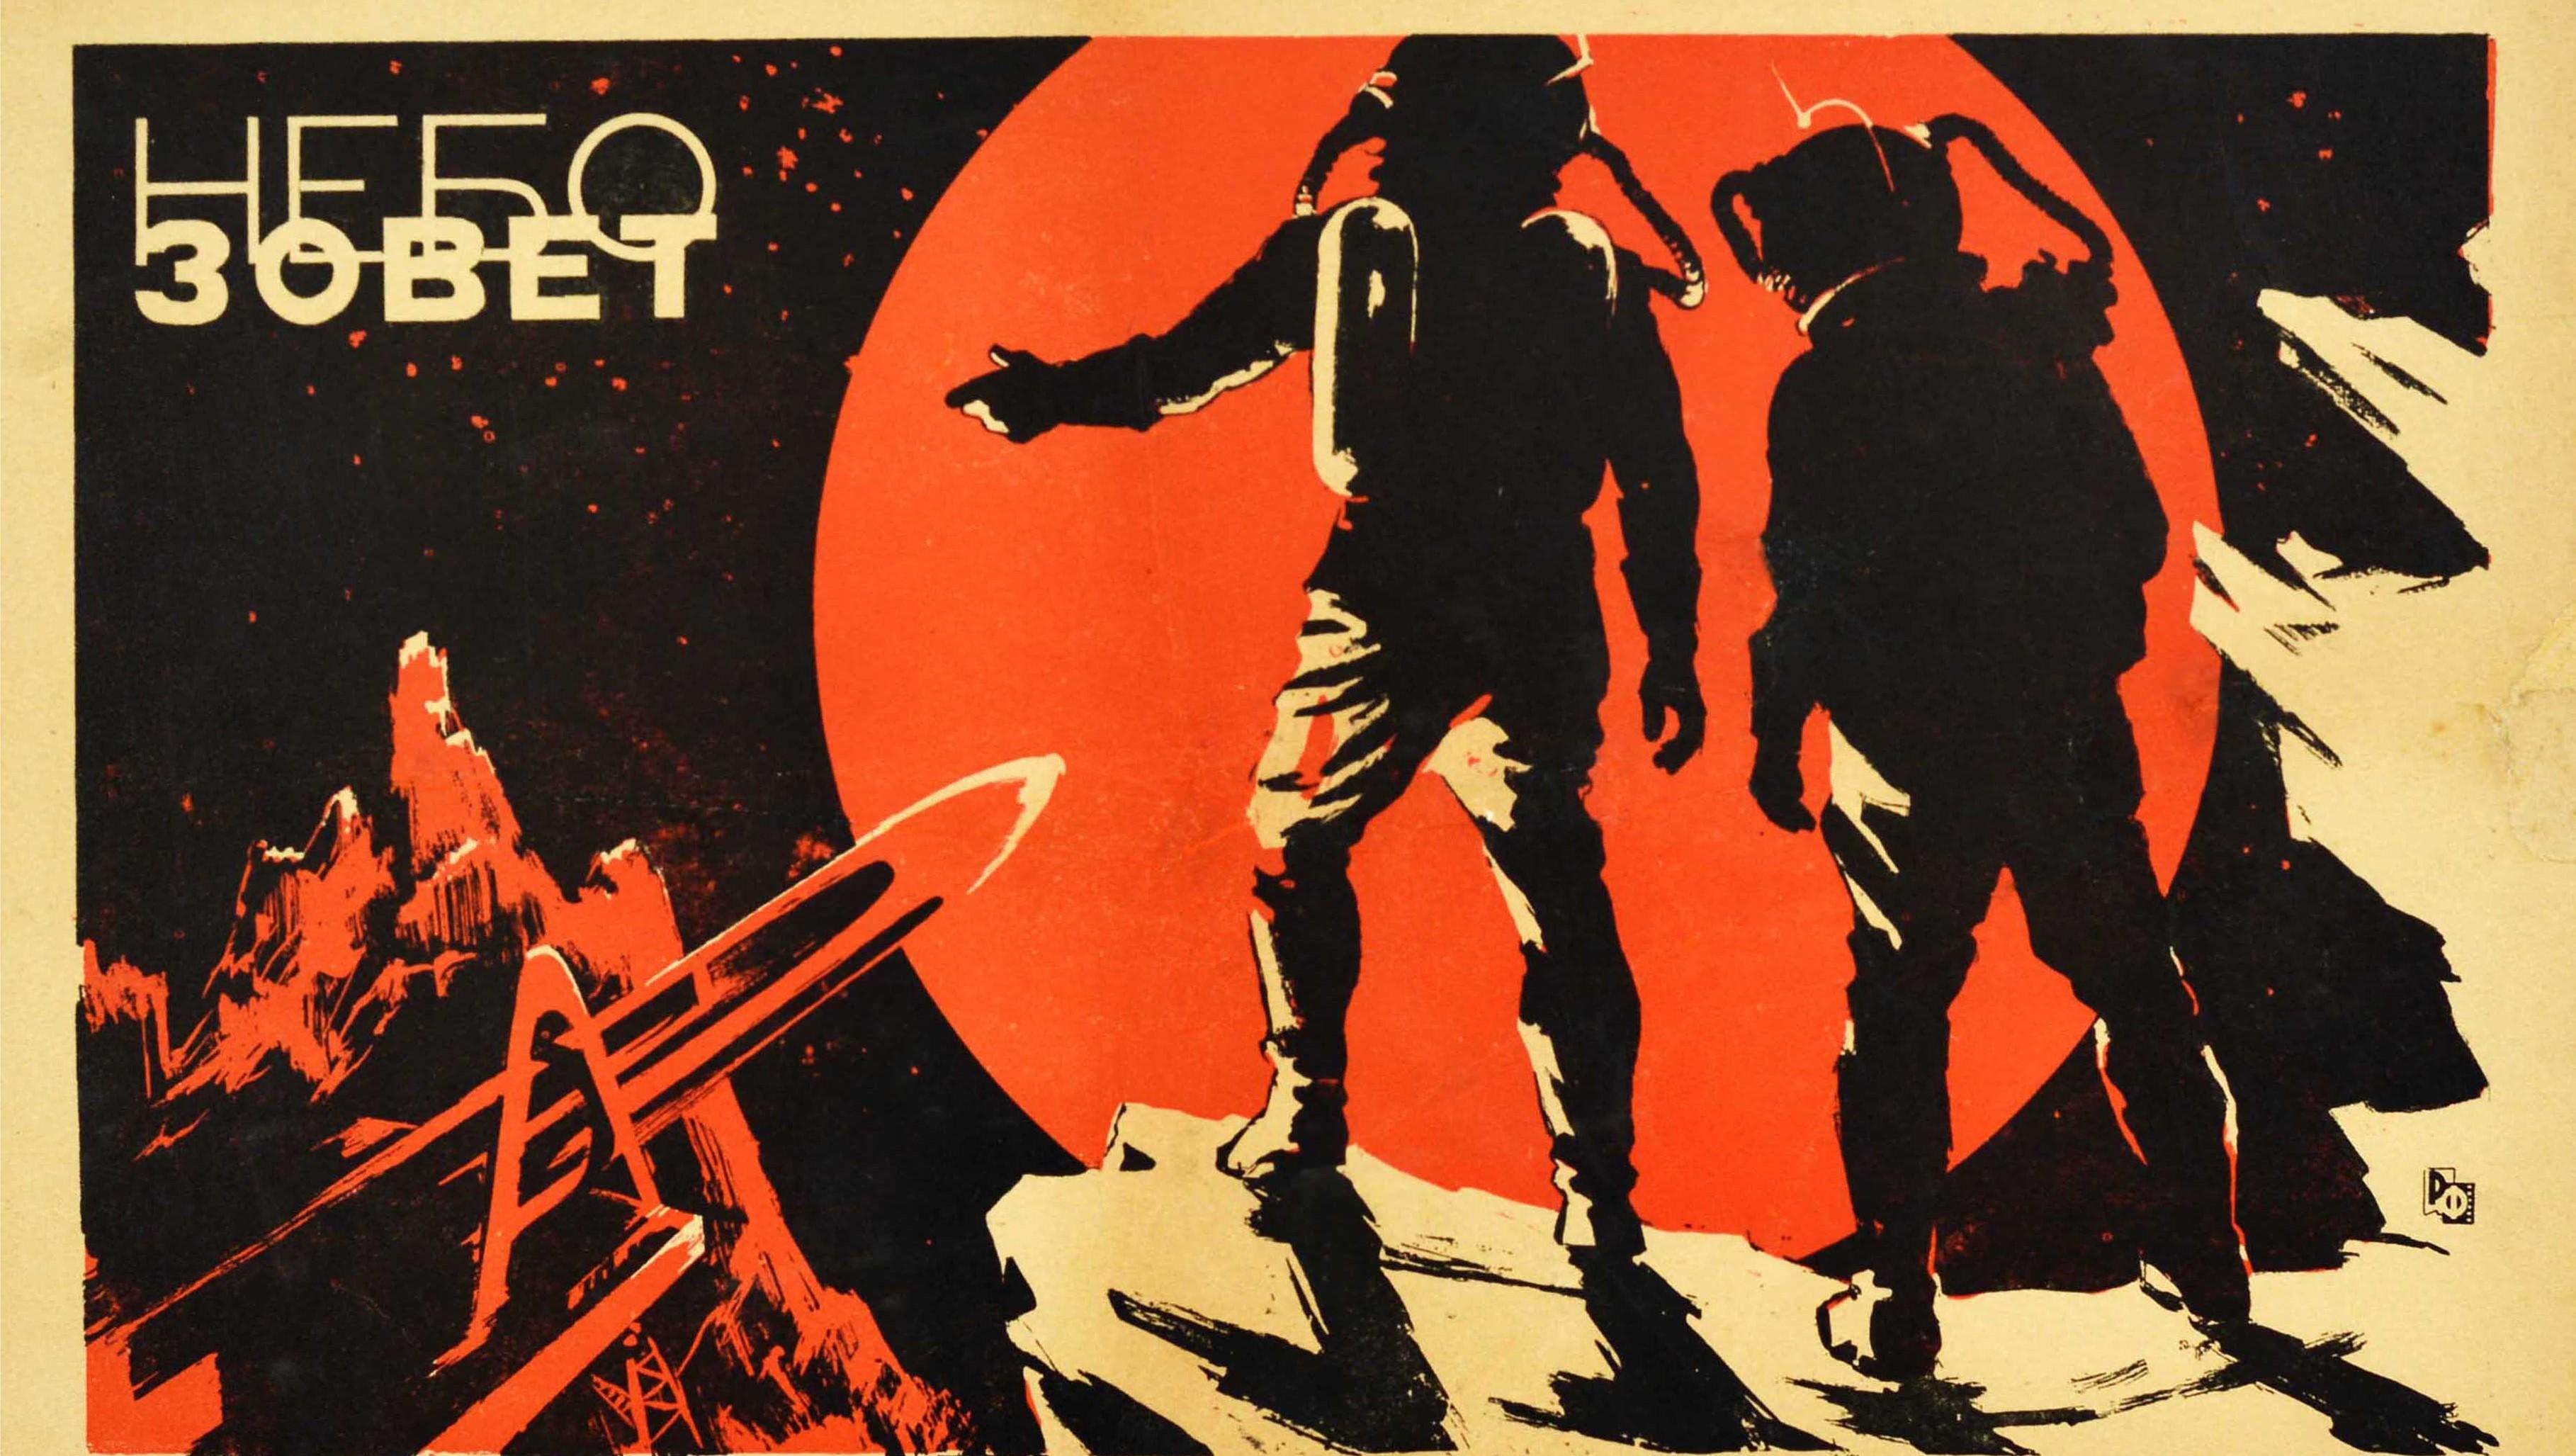 Original vintage Soviet sci-fi movie poster for the film Nebo Zovyot (Battle Beyond the Sun), about a space race to be the first to land on Mars - a science fiction thriller directed by Mikhail Karzhukov and Aleksandr Kozyr, starring Ivan